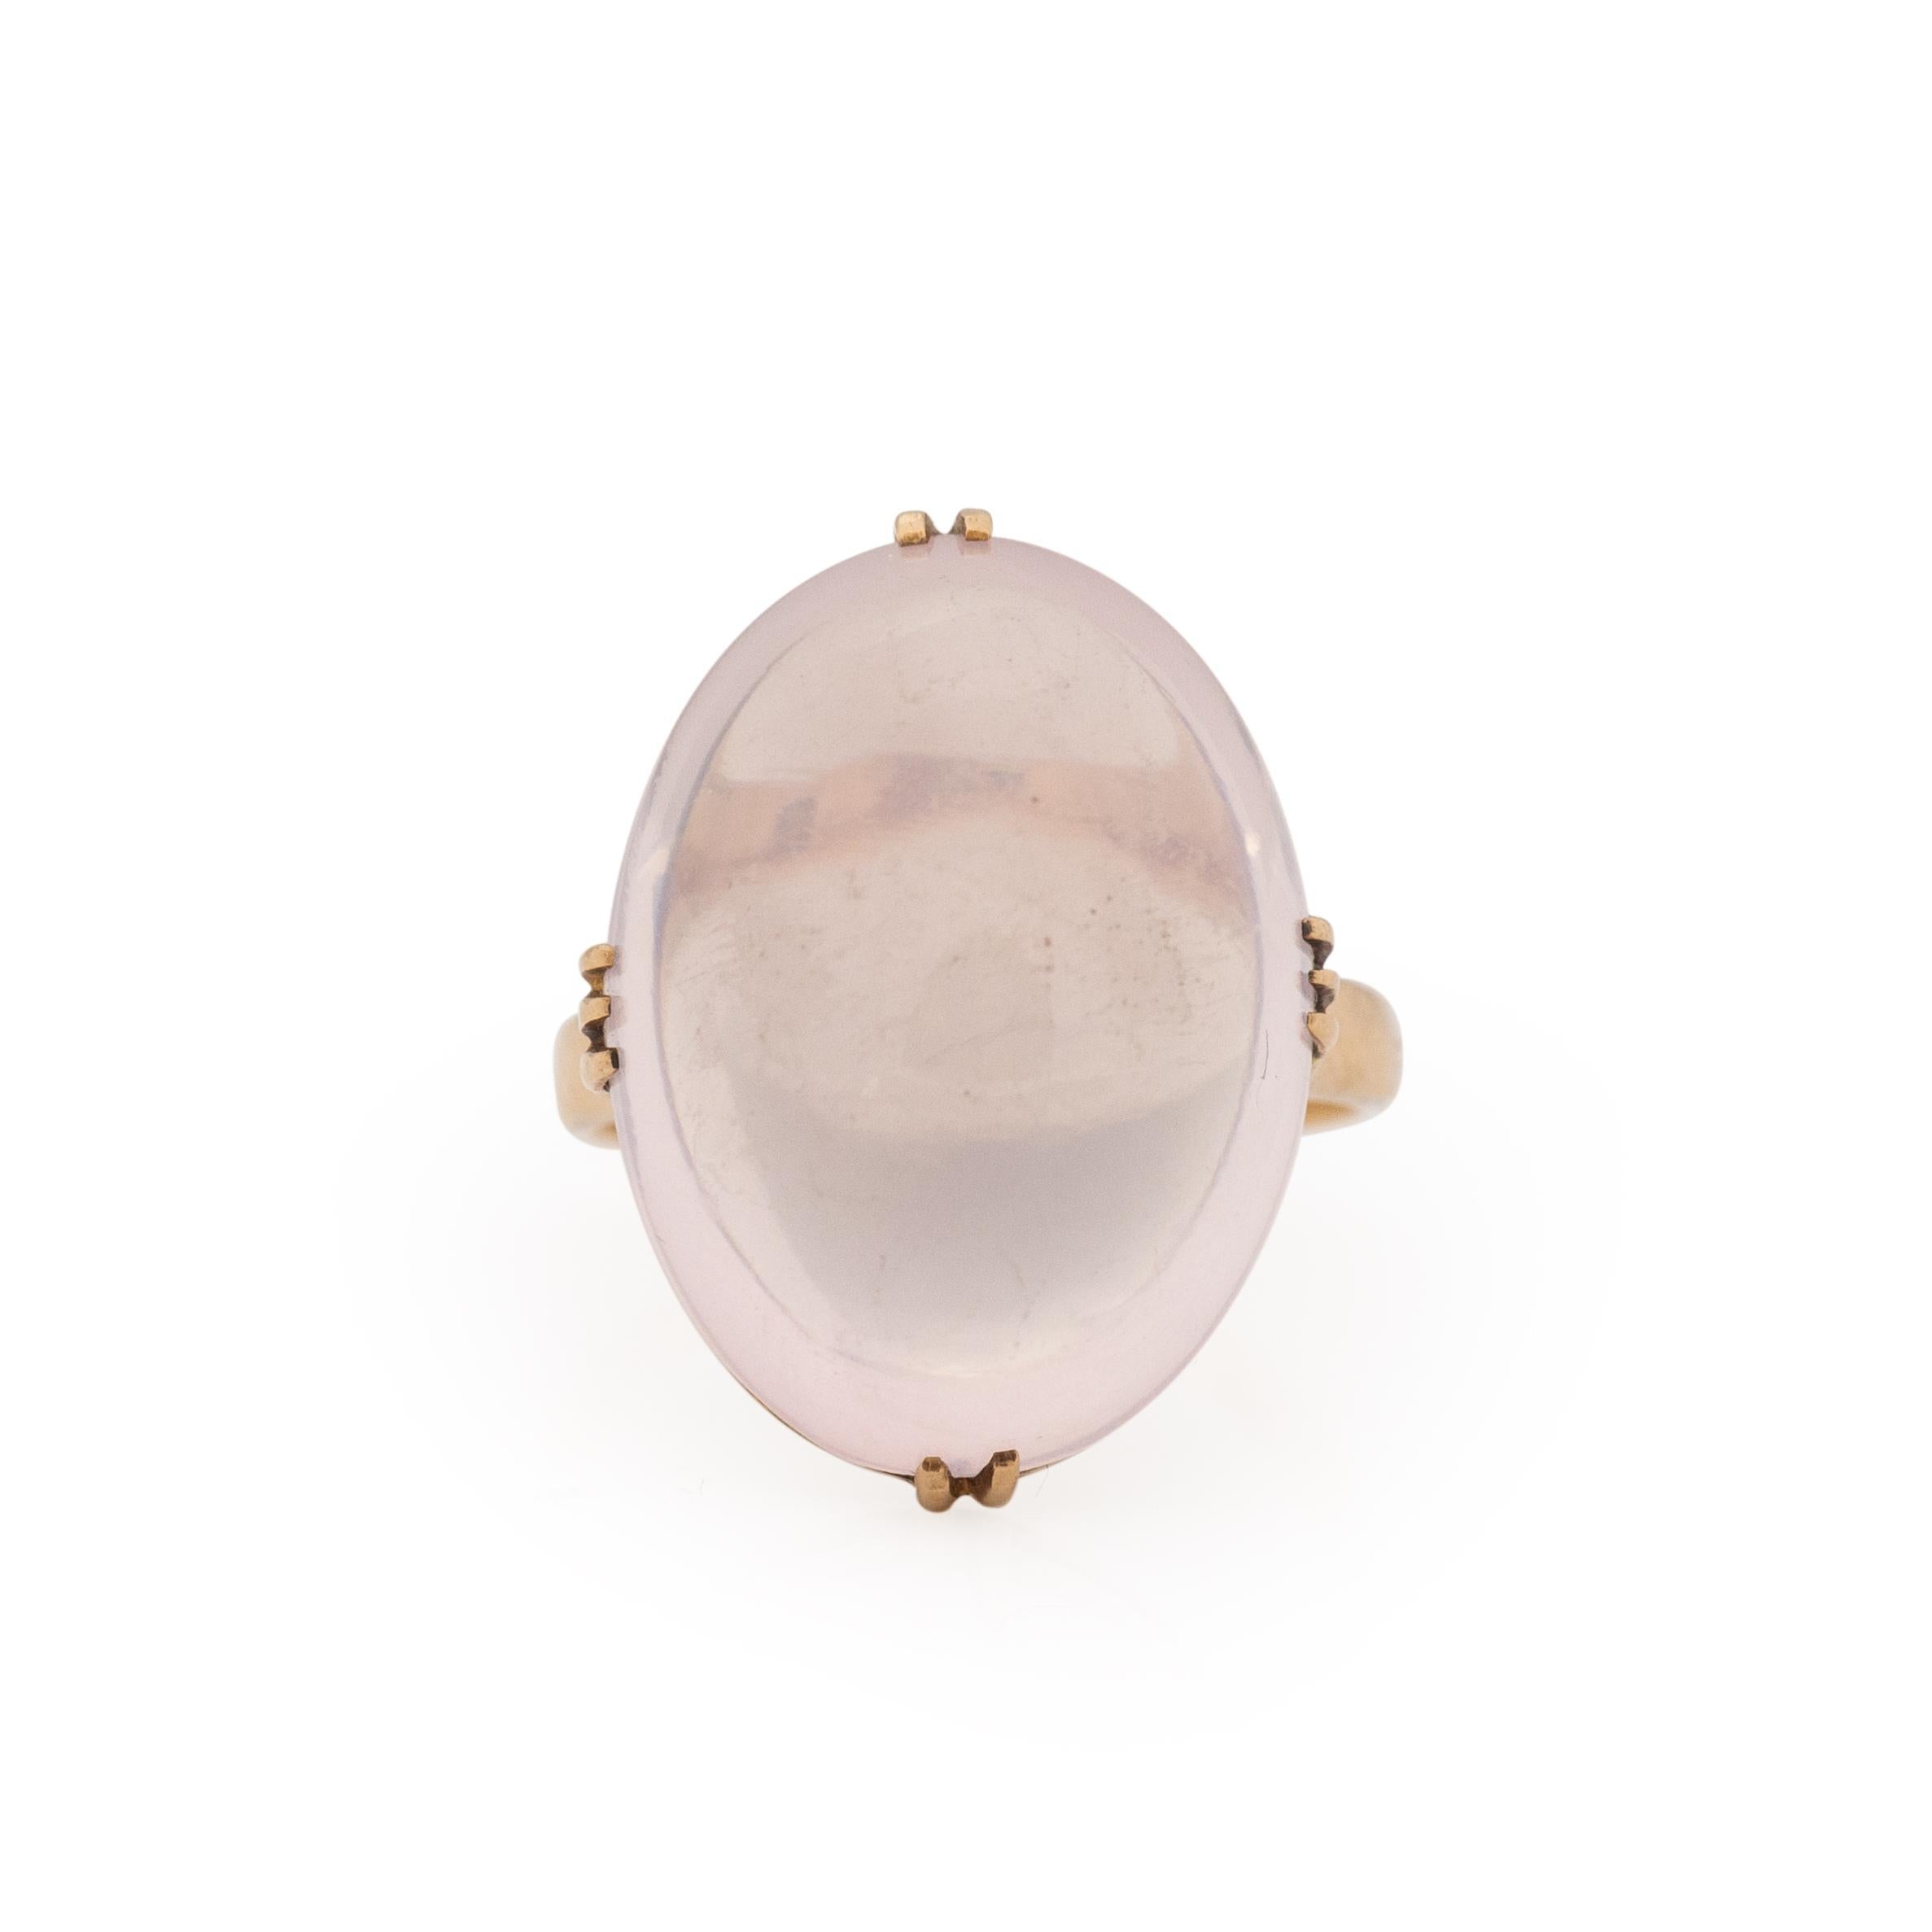 Here we have a unique beauty. The center moonstone is approximately 18.3Ct oval cabochon that has a outstanding lavender color to it. The prong setting holding the gum drop shaped moonstone is crafted in 18K yellow gold. This mount is perfect for